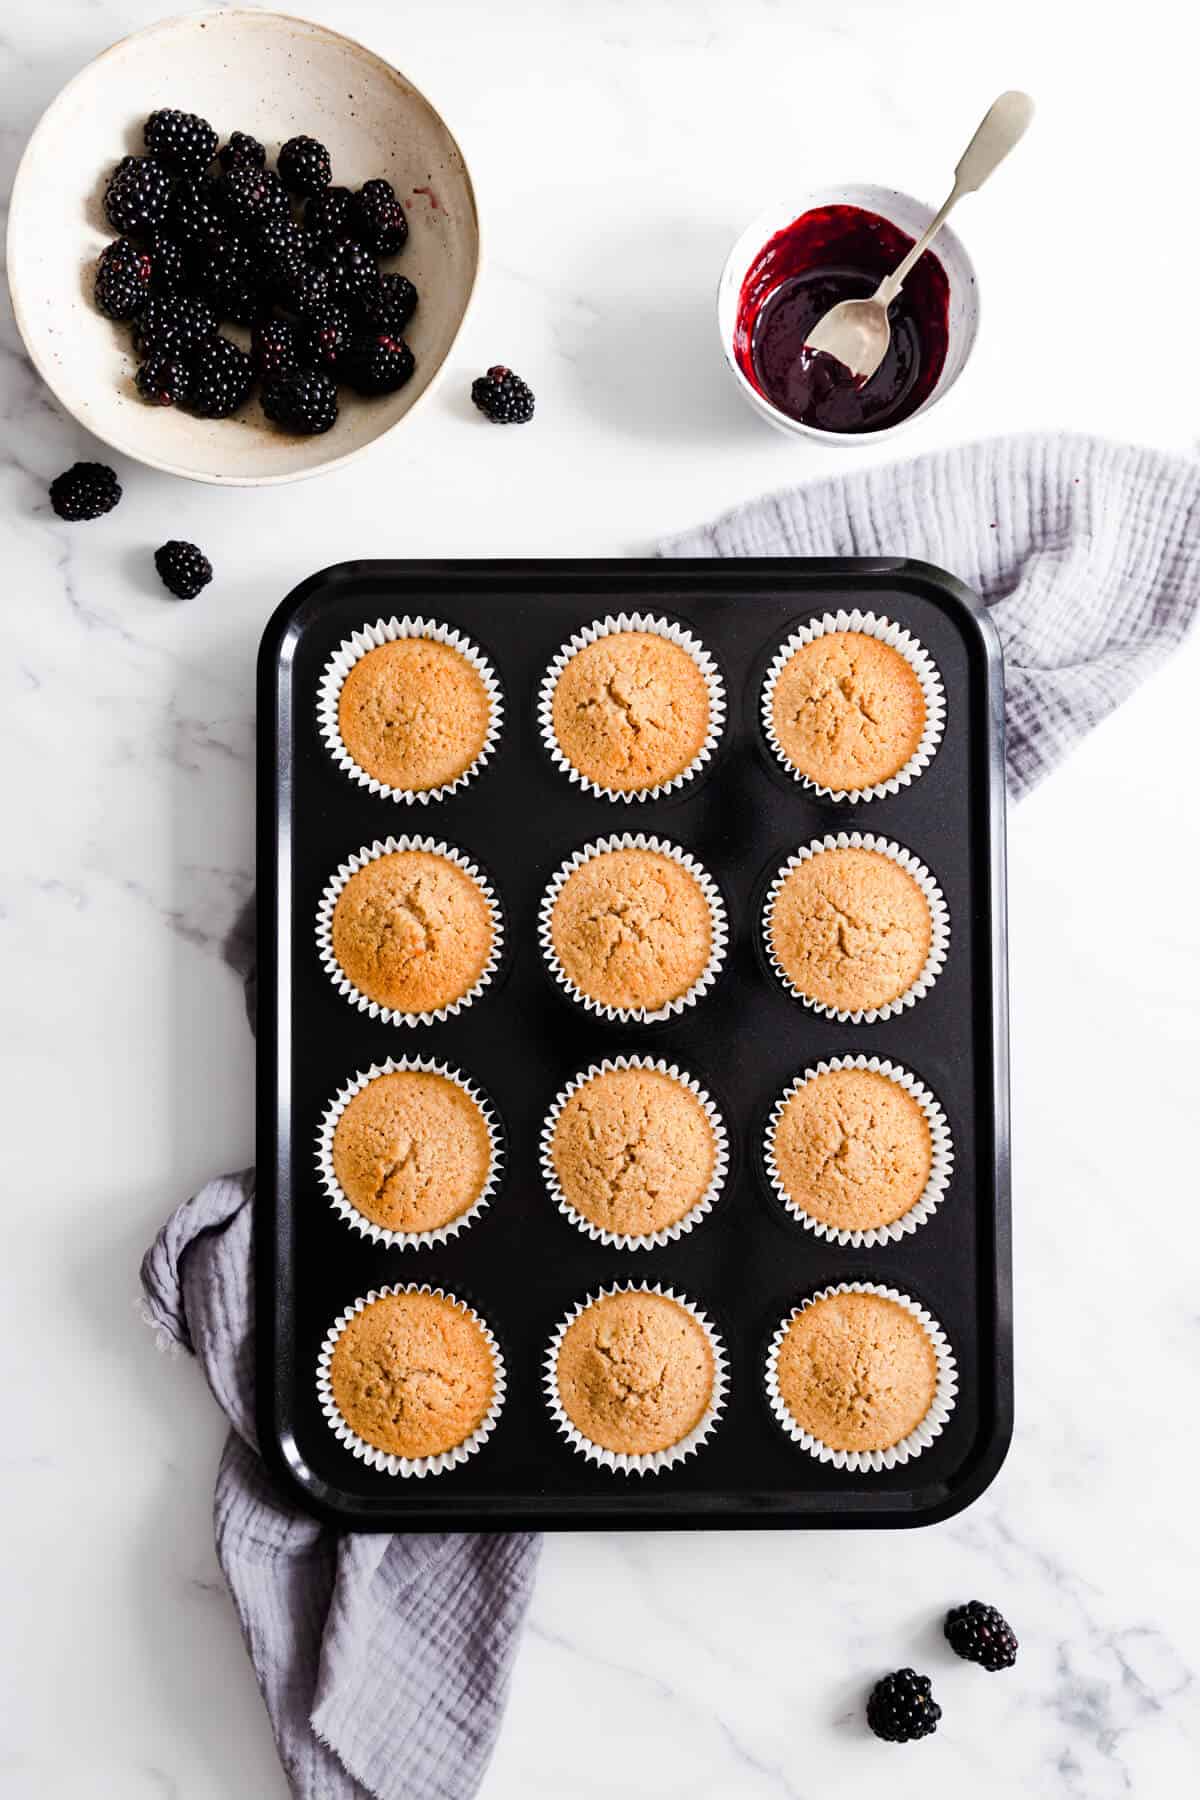 top view of a baking tray with spiced apple cupcakes inside